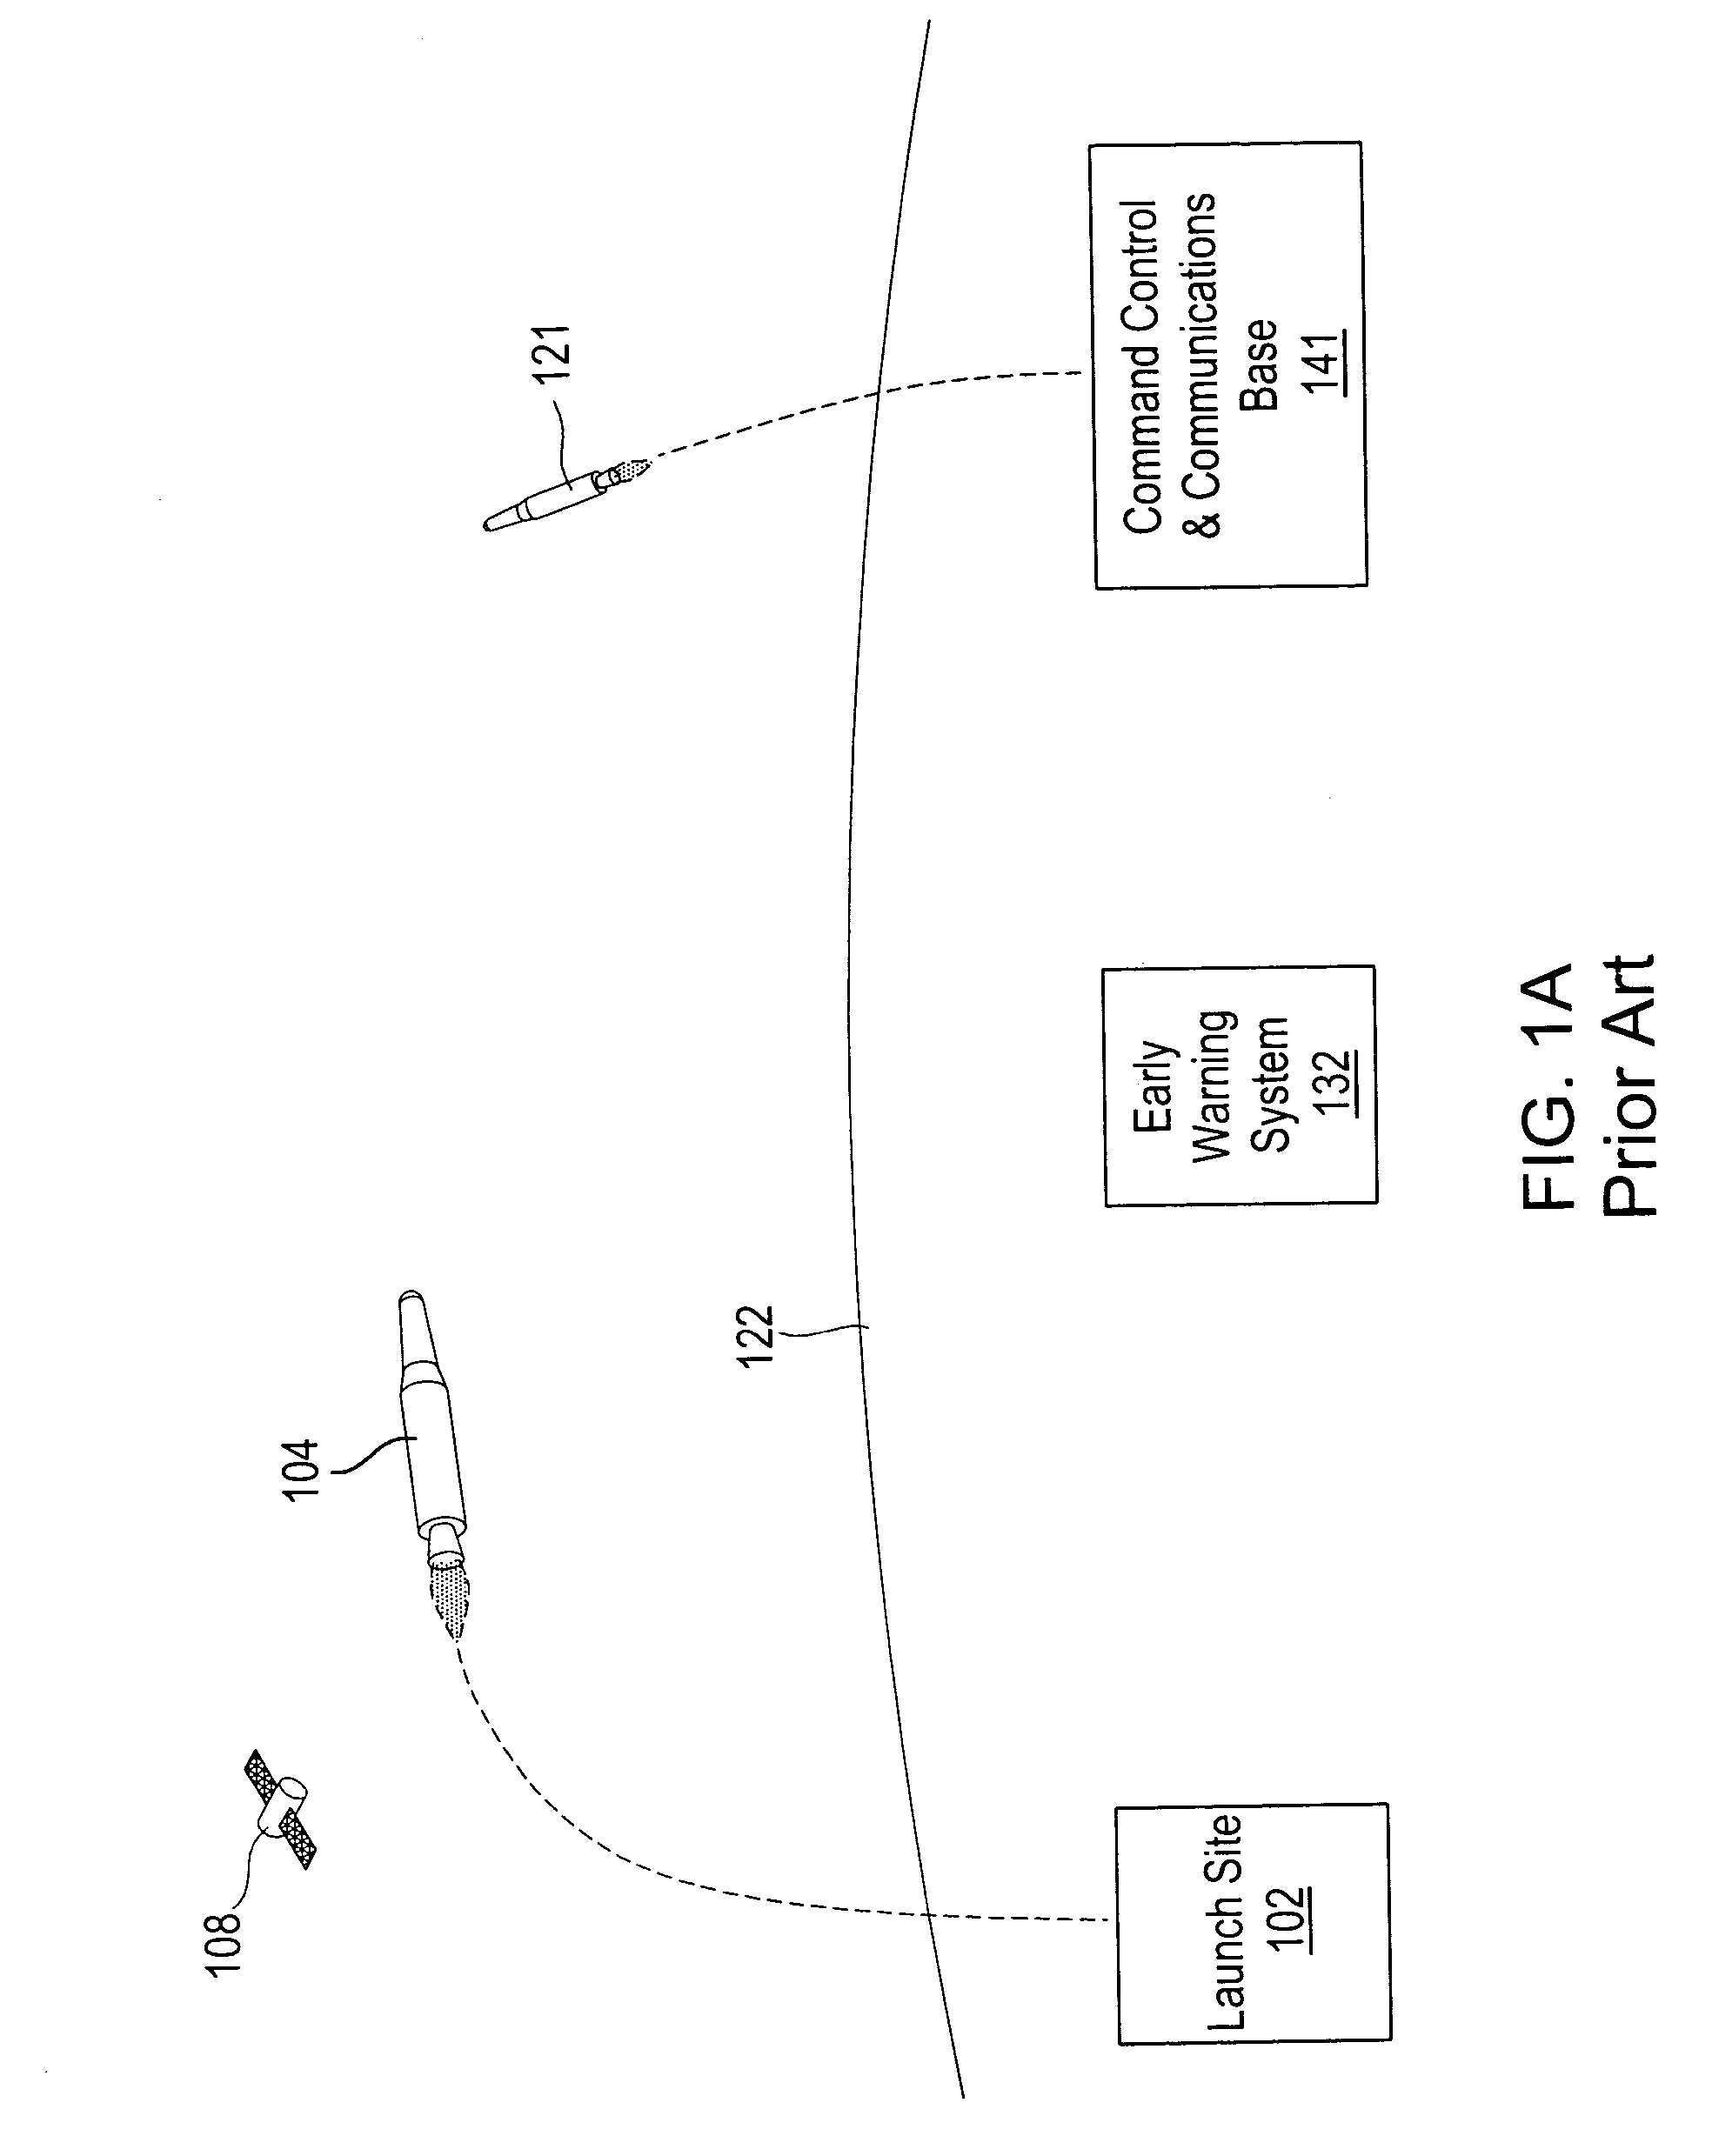 System and method for intercepting a projectile